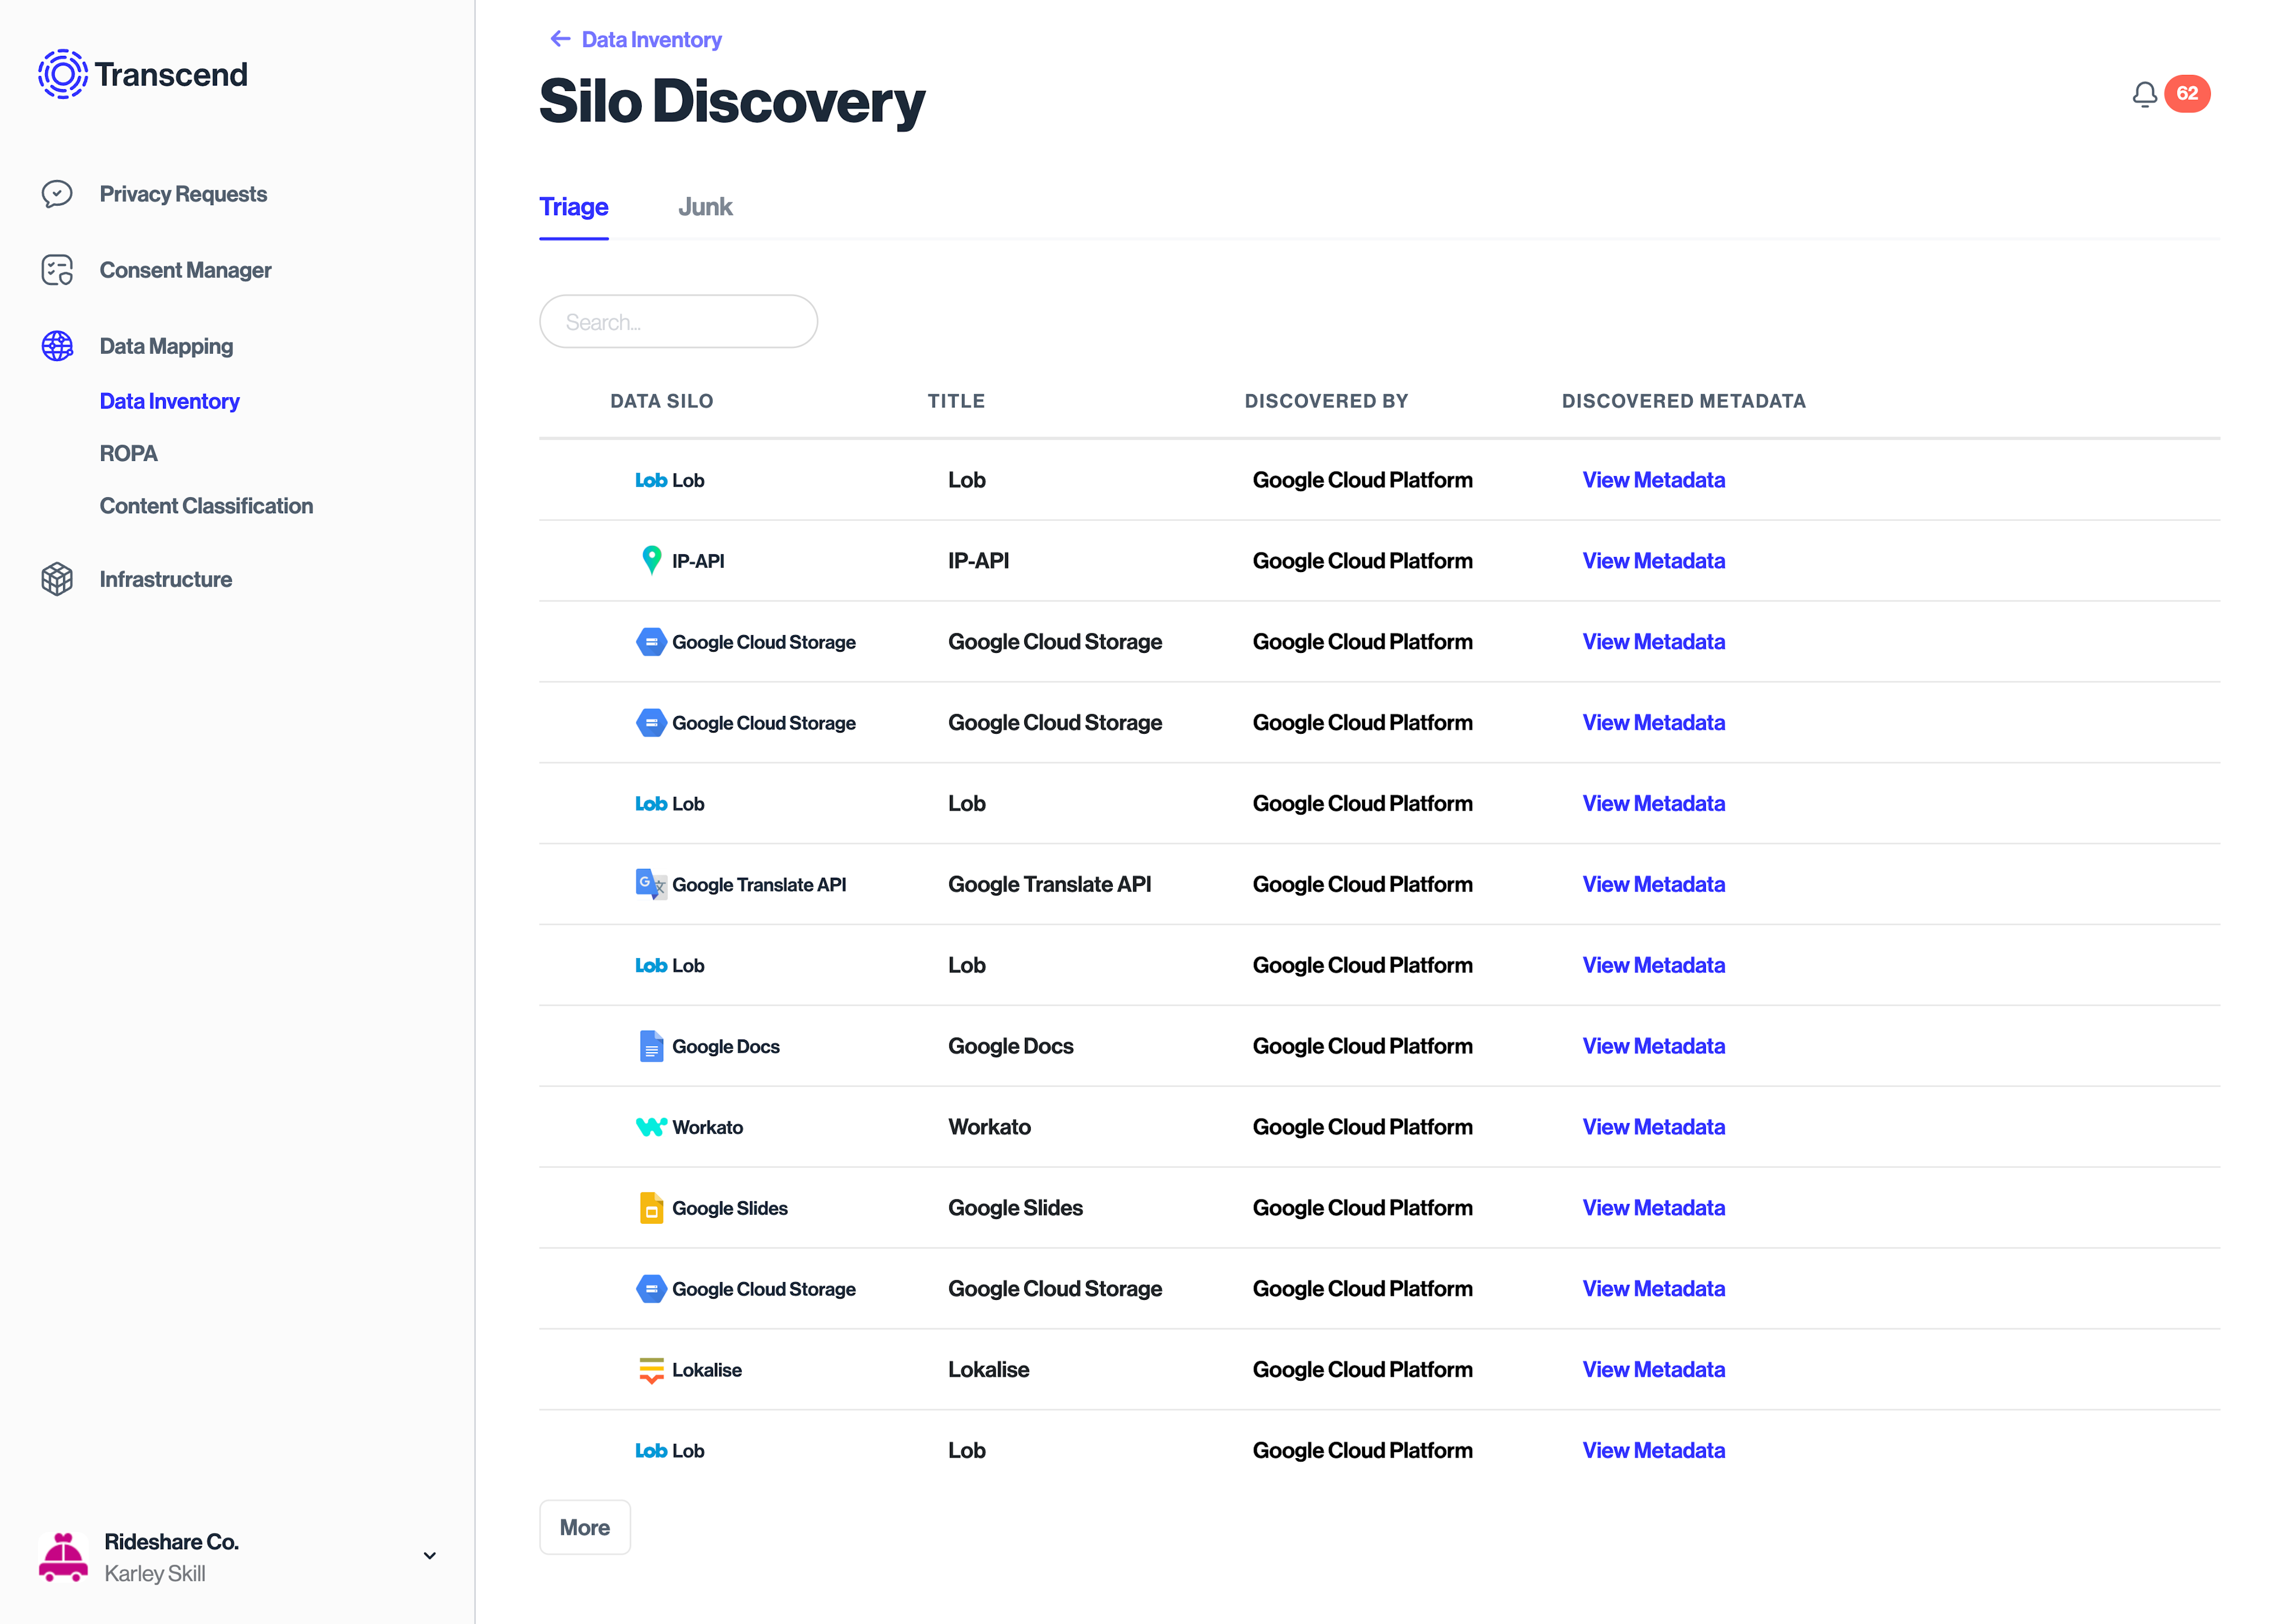 Resources discvoered by the GCP plugin and recommended as data silos